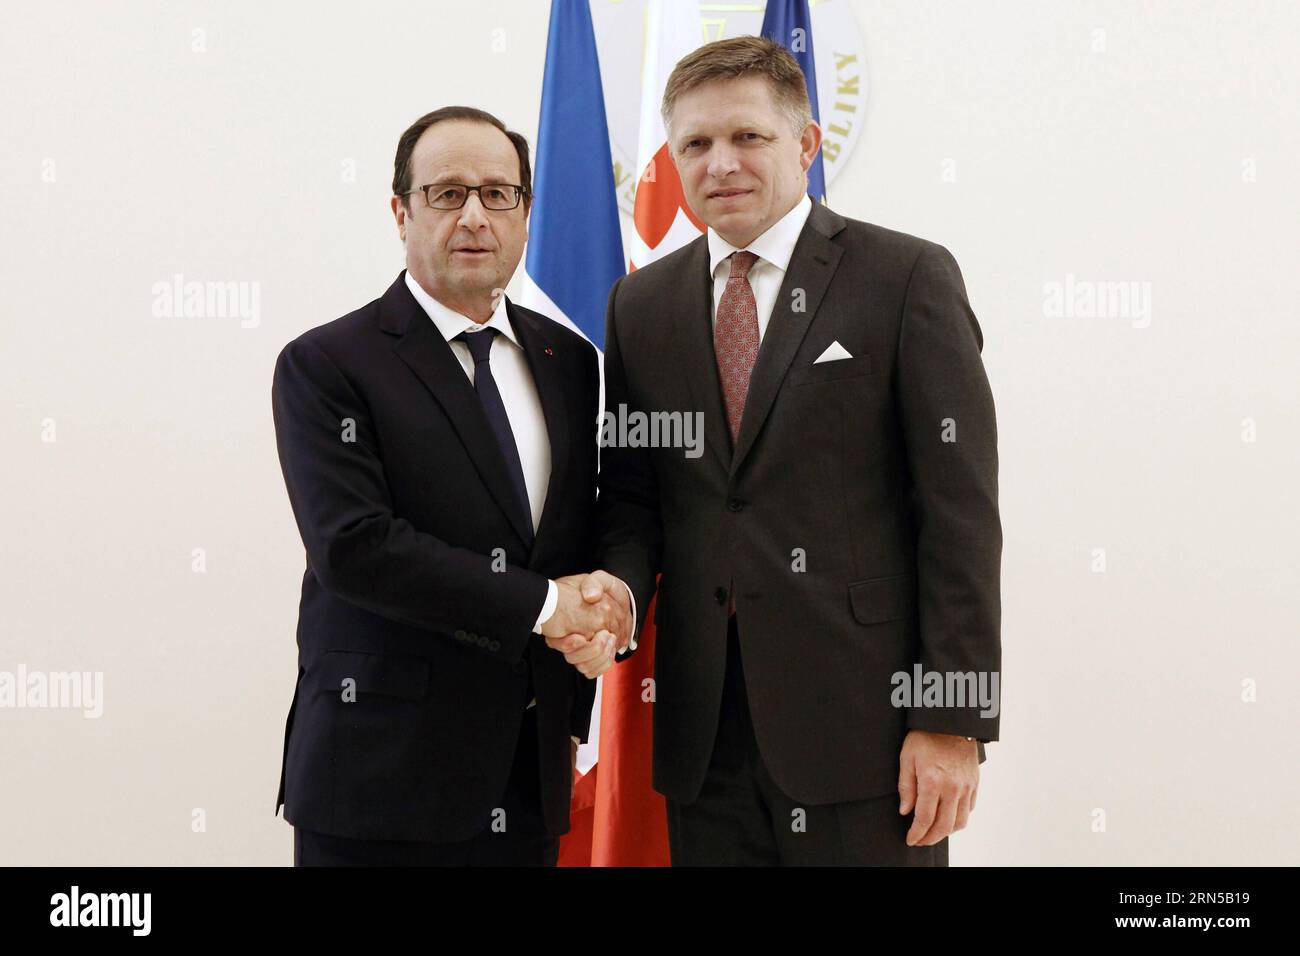 (150619) -- BRATISLAVA, June 19, 2015 -- Slovak Prime Minister Robert Fico (R) shakes hands with French President Francois Hollande, who is here to attend a summit of the prime ministers of the Visegrad Four (V4) countries, in Bratislava on June 19, 2015. Compromise with Greece still needs to be sought, but based on European rules, said French President Francois Hollande on Friday. ) SLOVAKIA-BRATISLAVA-VISEGRAD FOUR-FRANCE-SUMMIT AndrejxKlizan PUBLICATIONxNOTxINxCHN   150619 Bratislava June 19 2015 Slovak Prime Ministers Robert Fico r Shakes Hands With French President François Hollande Who I Stock Photo